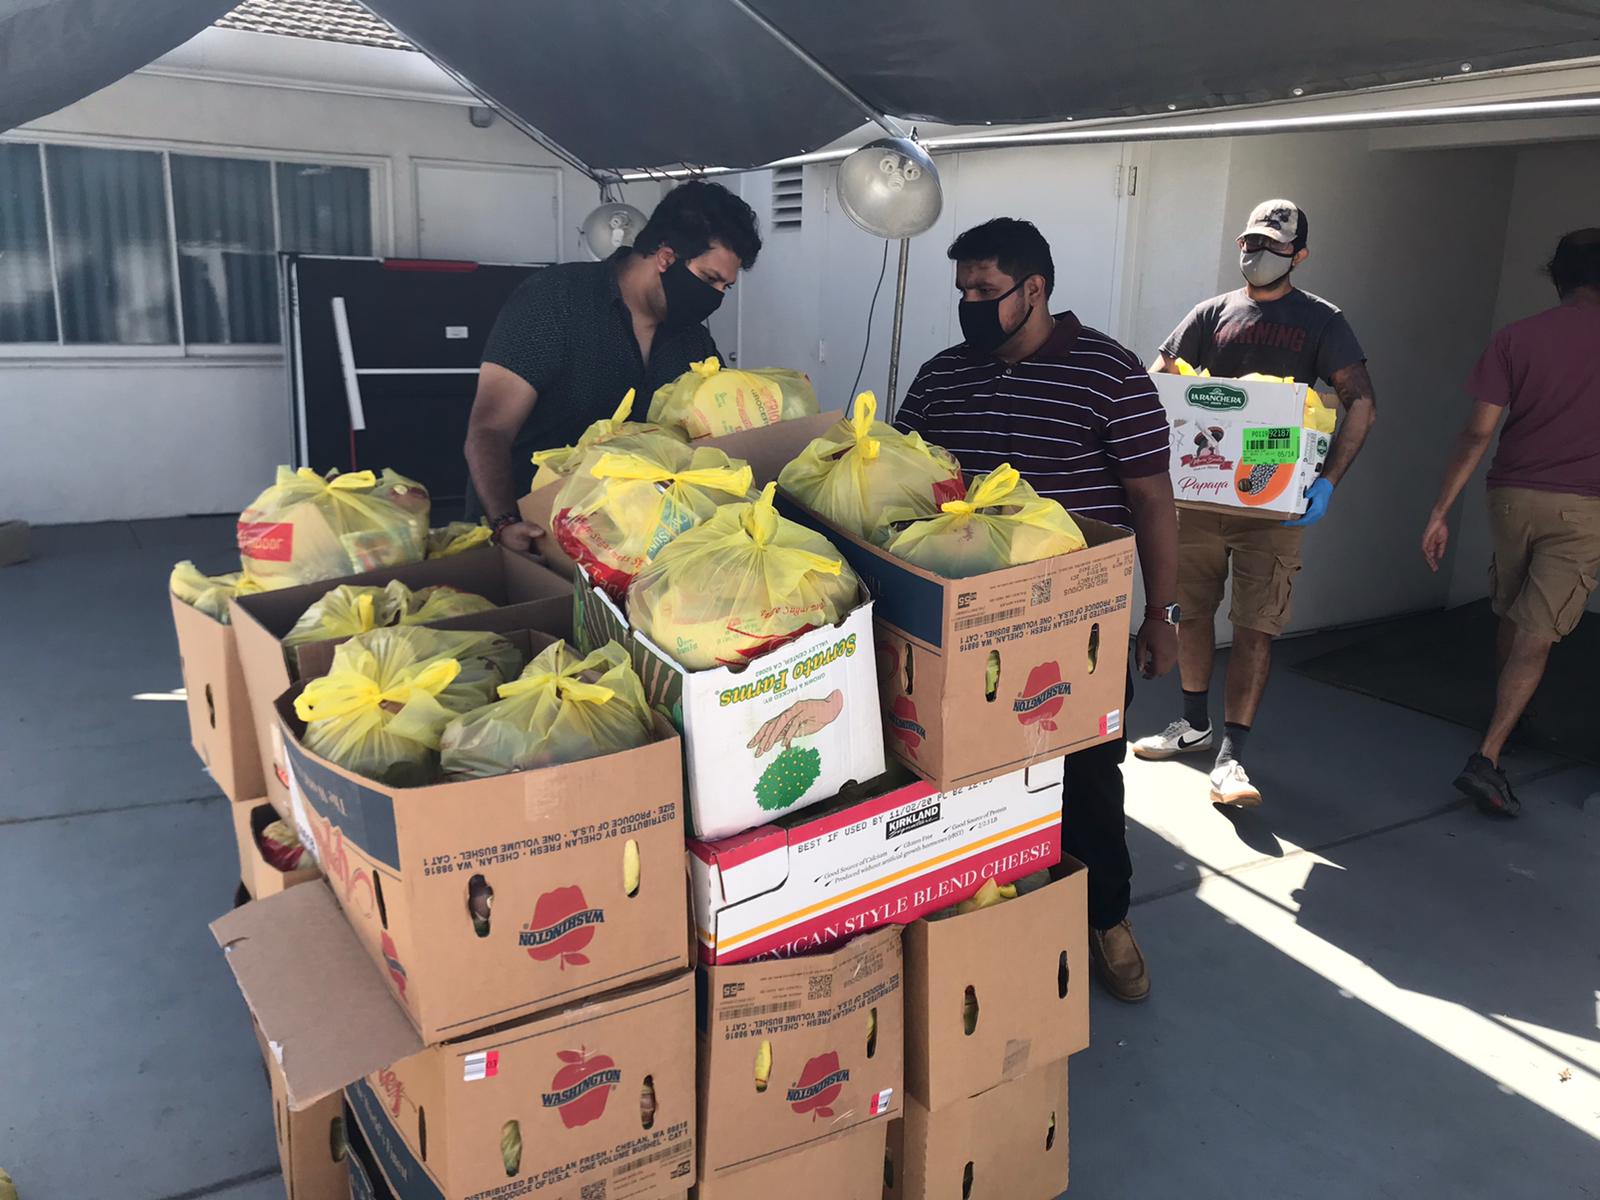 Once each bag is created, they’re transported to the staging area as our site prep team setup the loading area. Volunteers have delivered large quantity of bags to homeless shelters, students at Cal State Long Beach, and other meal drives.